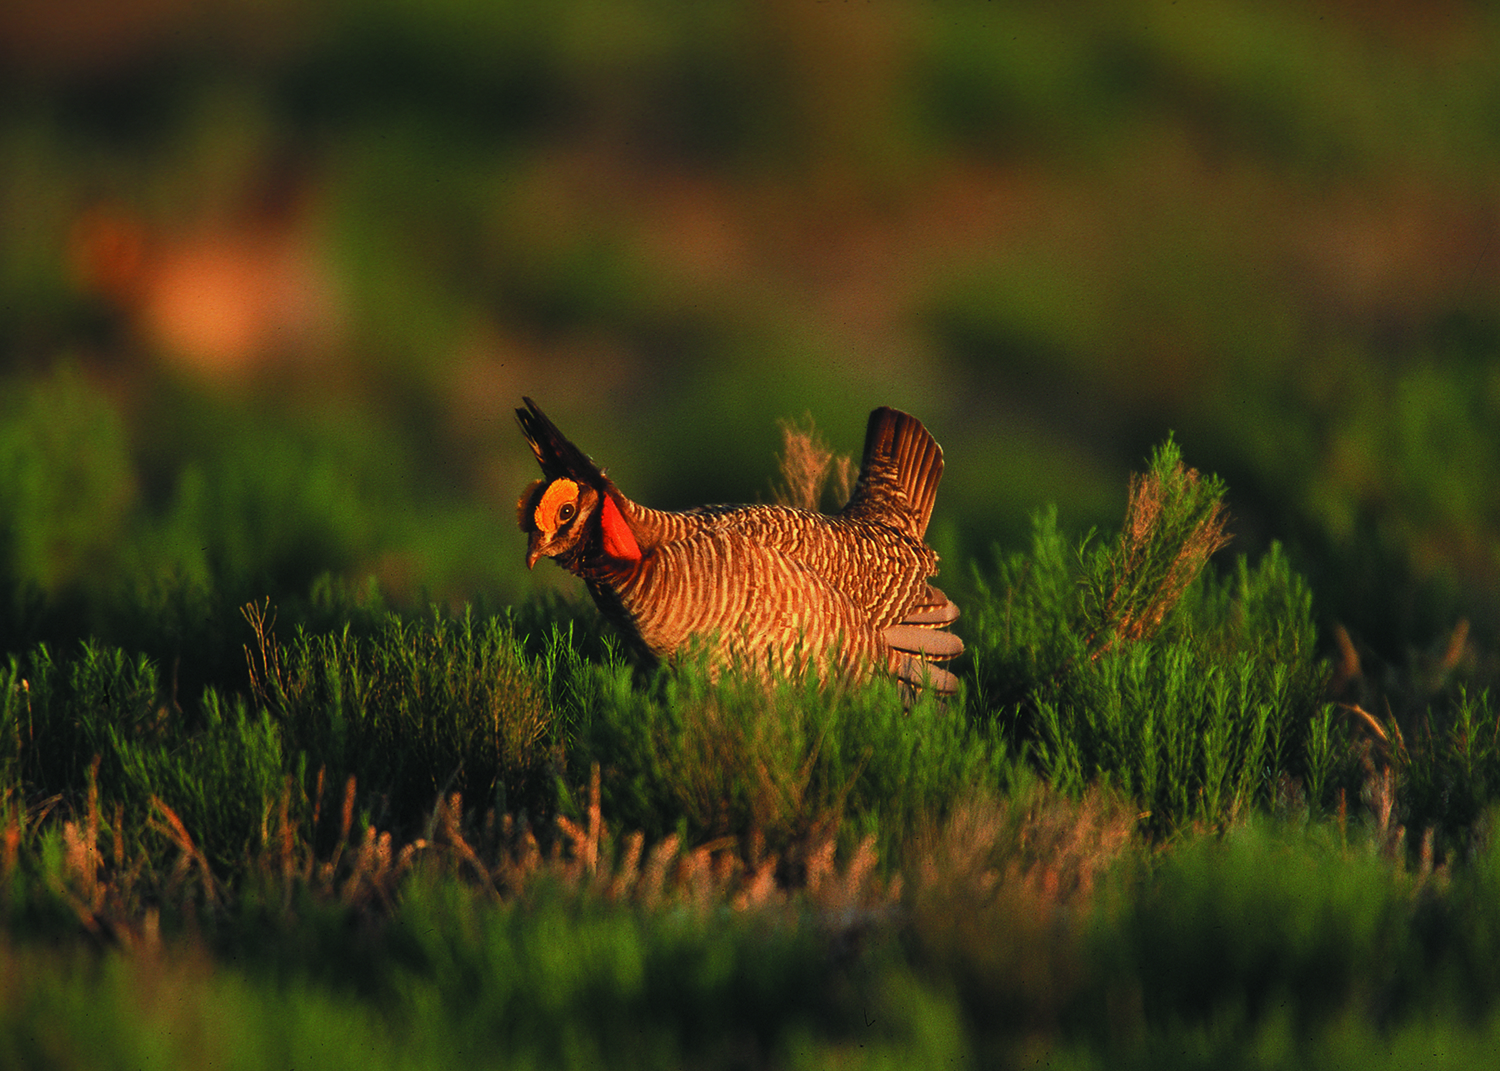 A lesser prairie-chicken in its natural habitat in eastern New Mexico. This image by Gary Kramer is courtesy of Wikimedia Commons and the USDA Natural Resources Conservation Service.